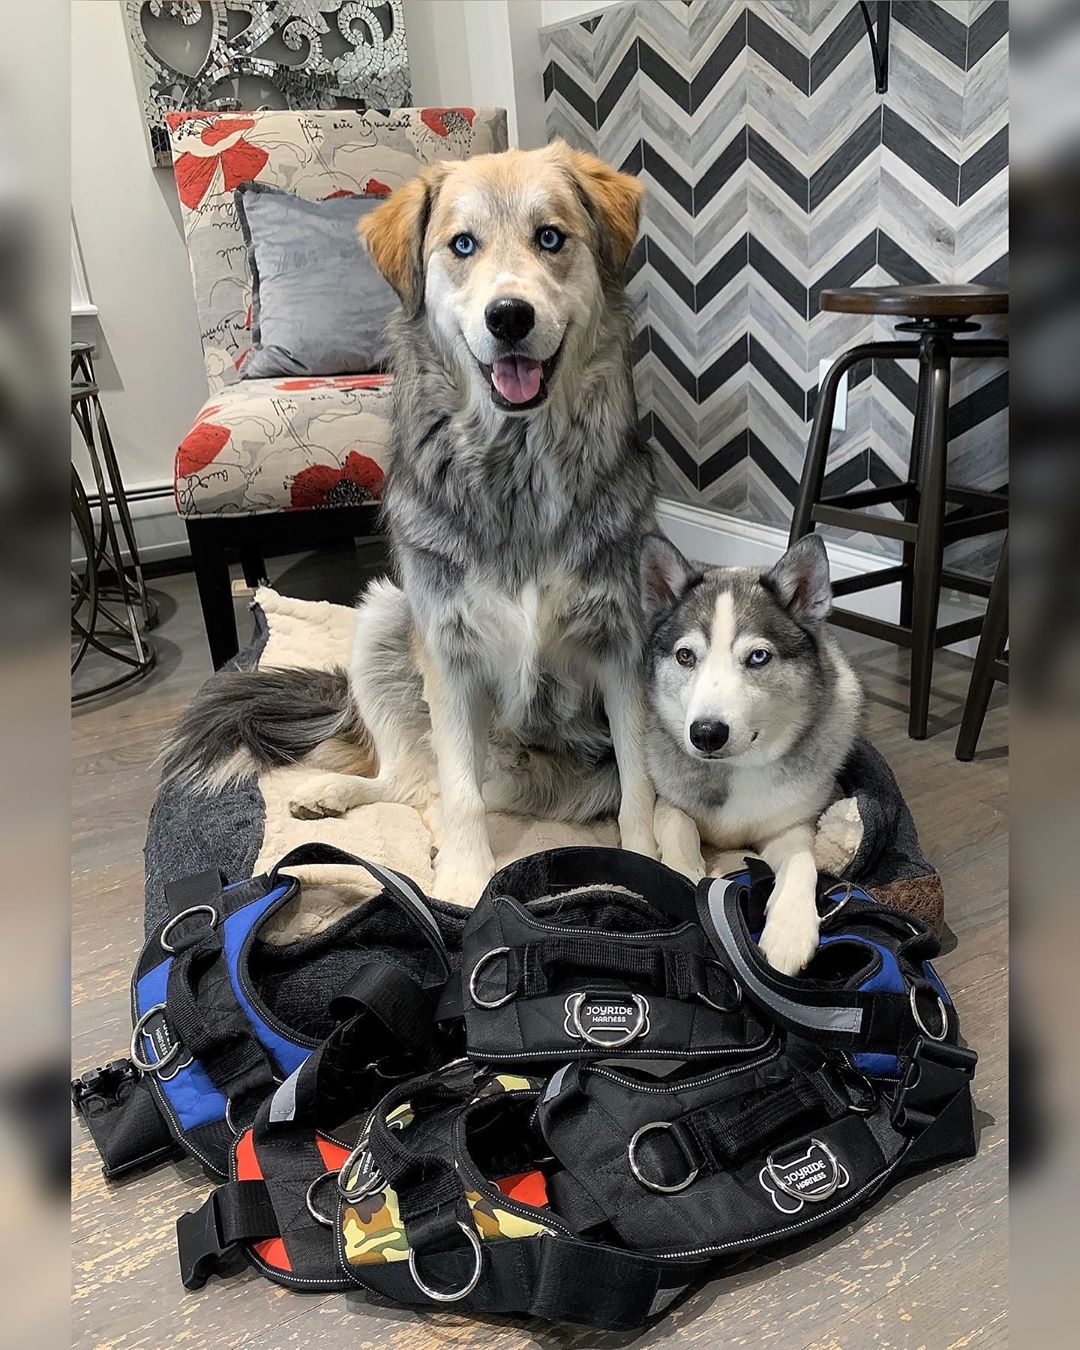 Joyride Harness is Reviewed and Approved by Half Husky Bros